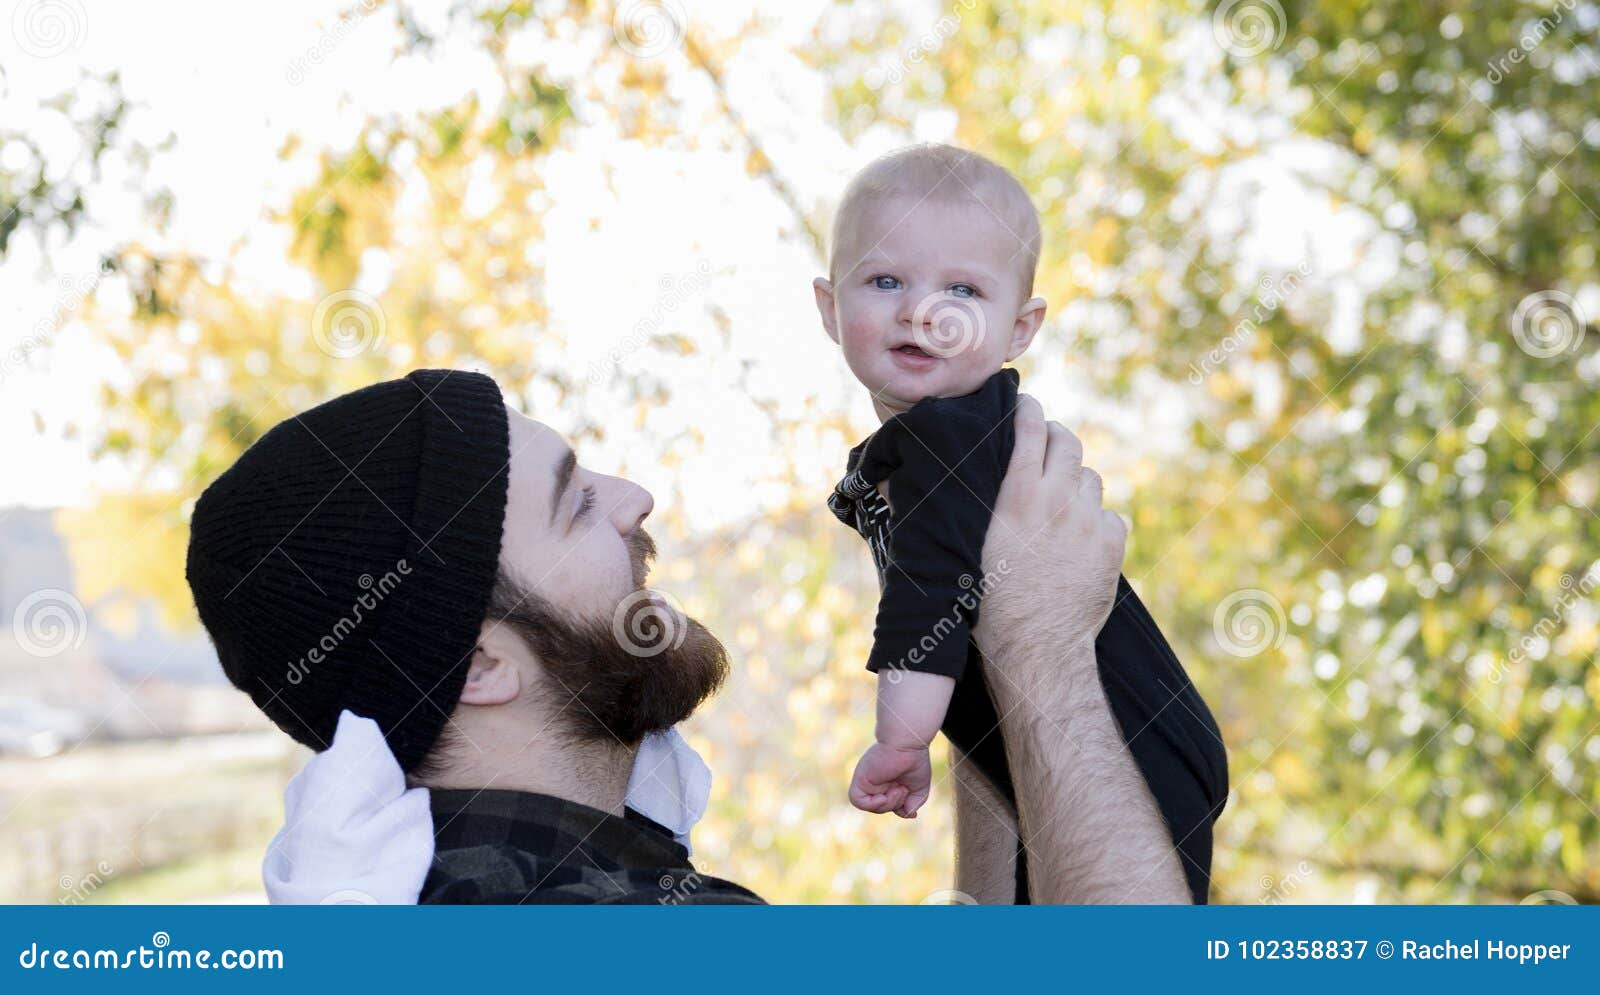 millennial dad holding baby daughter up showing affection